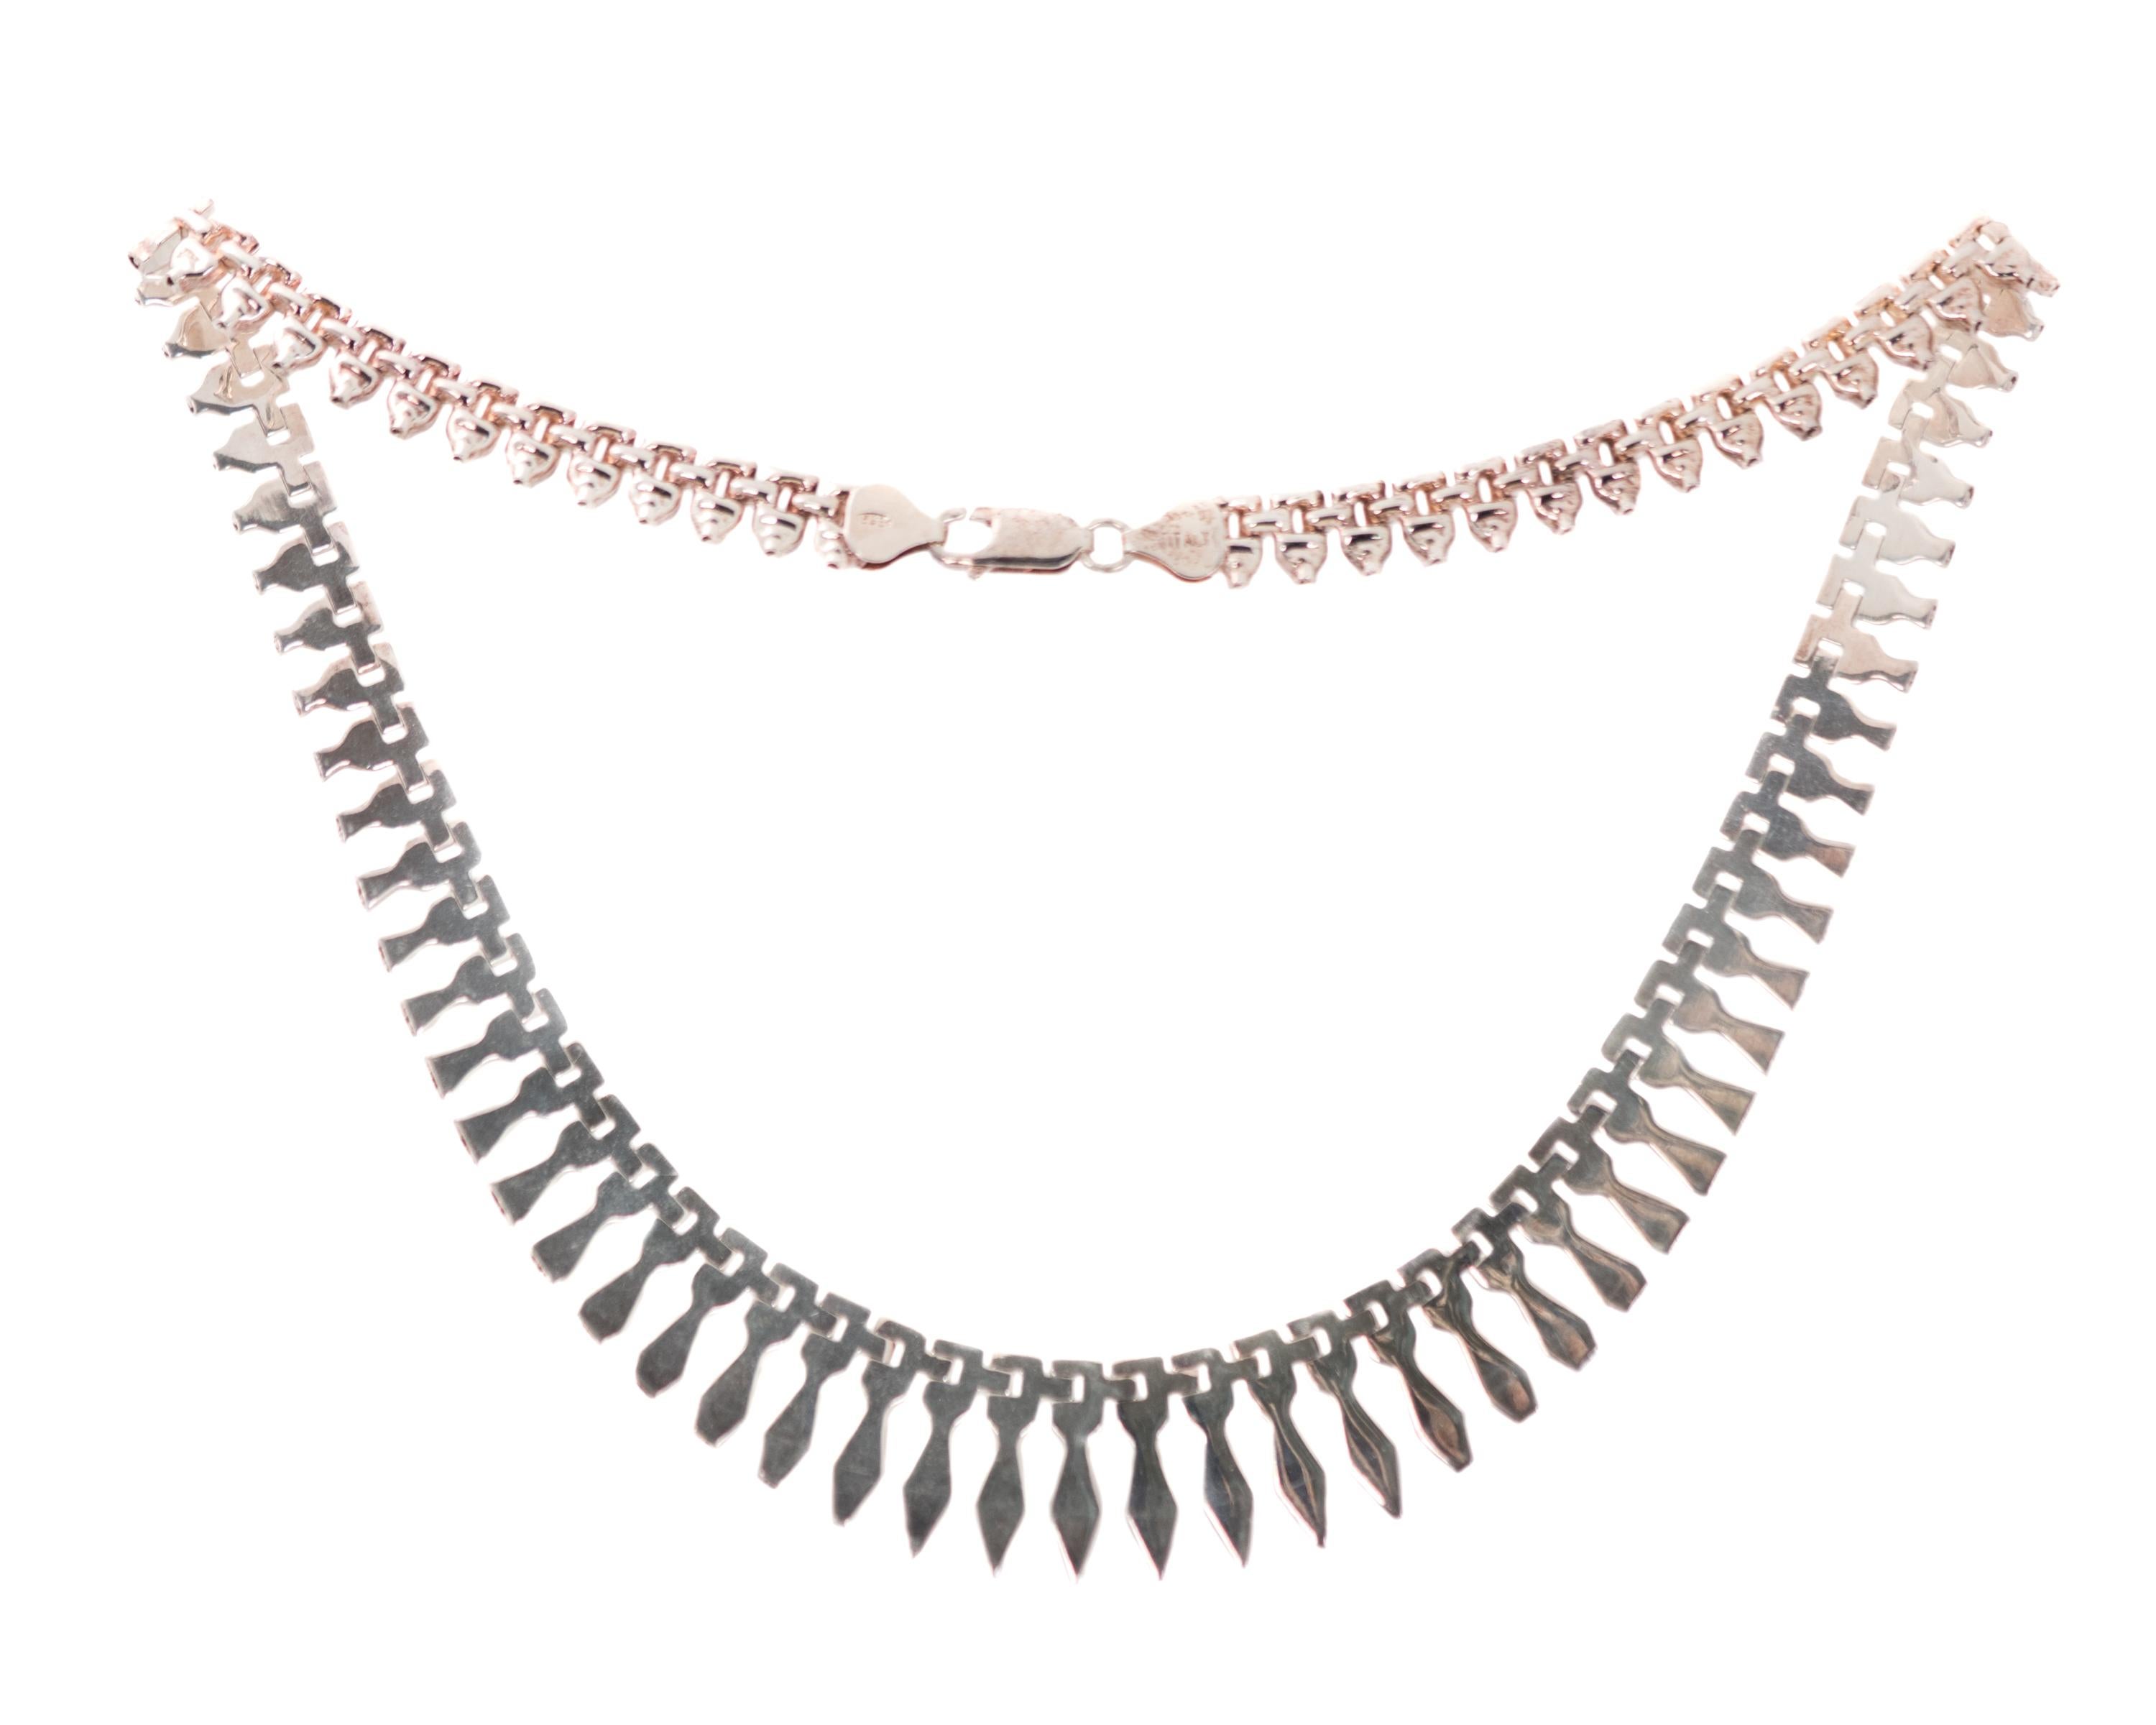 17 inch long Cleopatra Necklace - Sterling Silver

Features high polish Sterling Silver links arranged in a graduated length from front to back.
This collarbone-length necklace lays smoothly for an elegant appearance.
Each link is individually